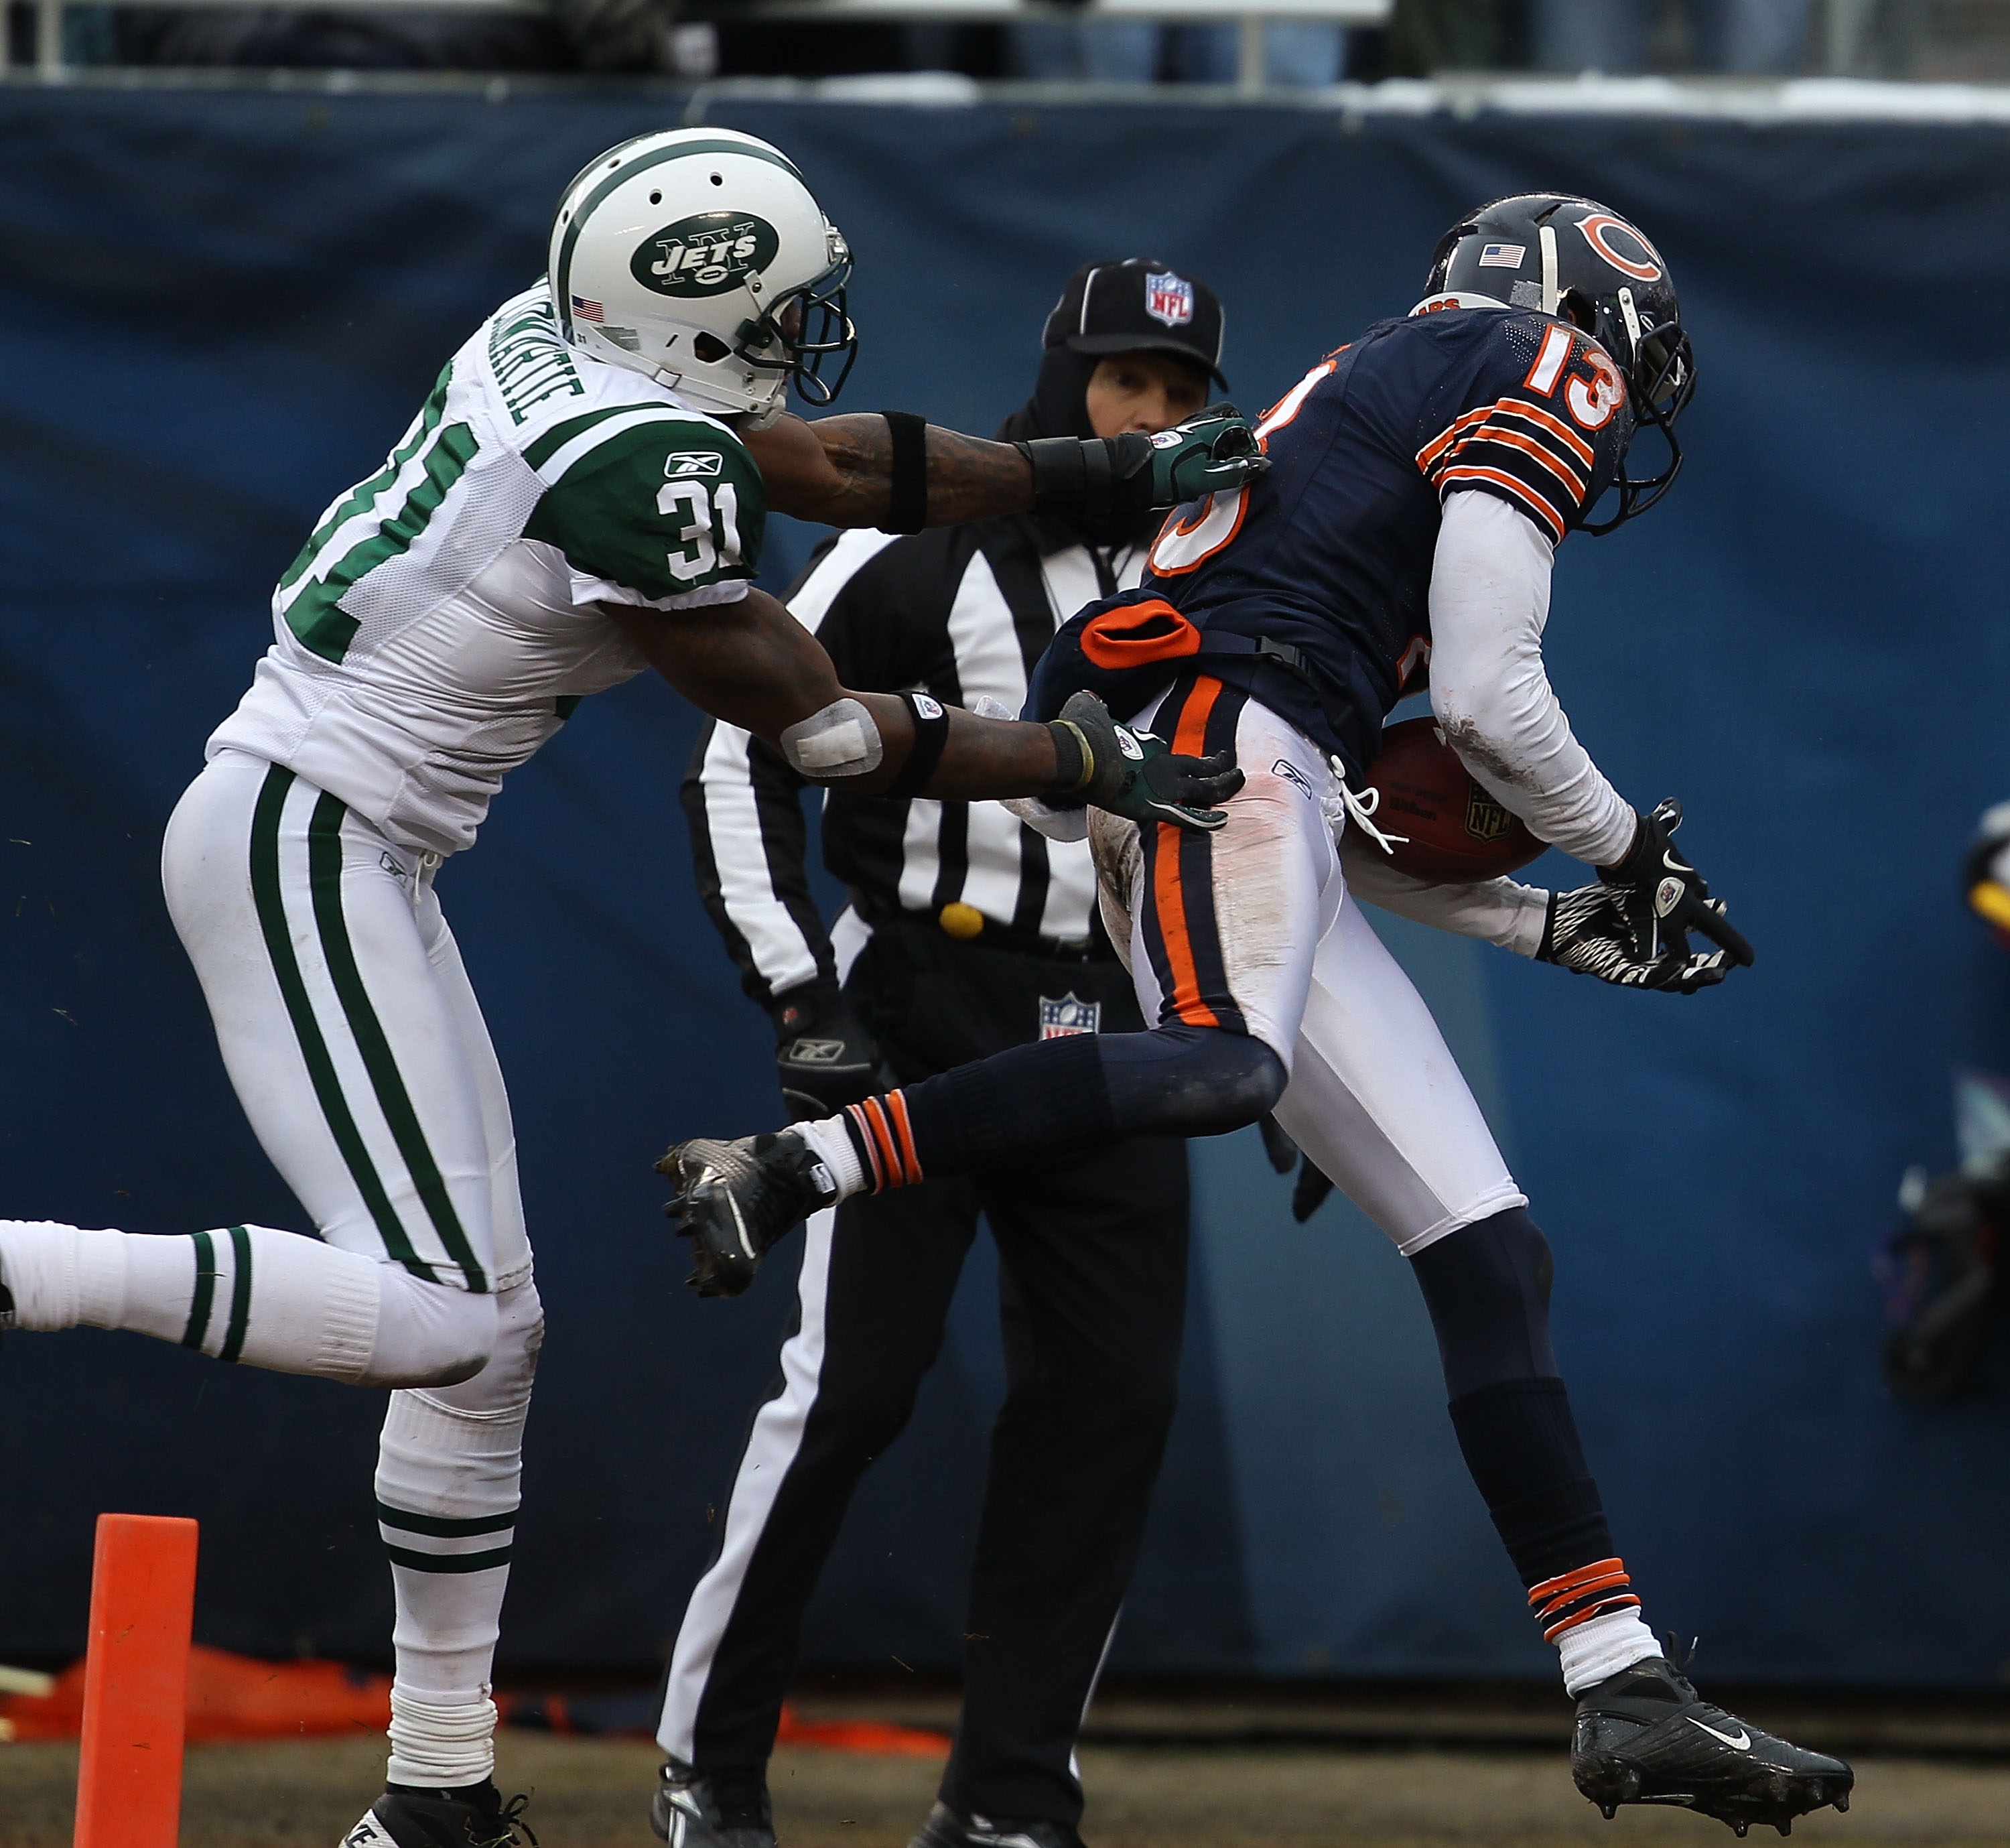 CHICAGO, IL - DECEMBER 26: Johnny Knox #13 of the Chicago Bears catches a touchdown pass in front of Antonio Cromartie #31 of the New York Jets at Soldier Field on December 26, 2010 in Chicago, Illinois. The Bears defeated the Jets 38-34. (Photo by Jonath